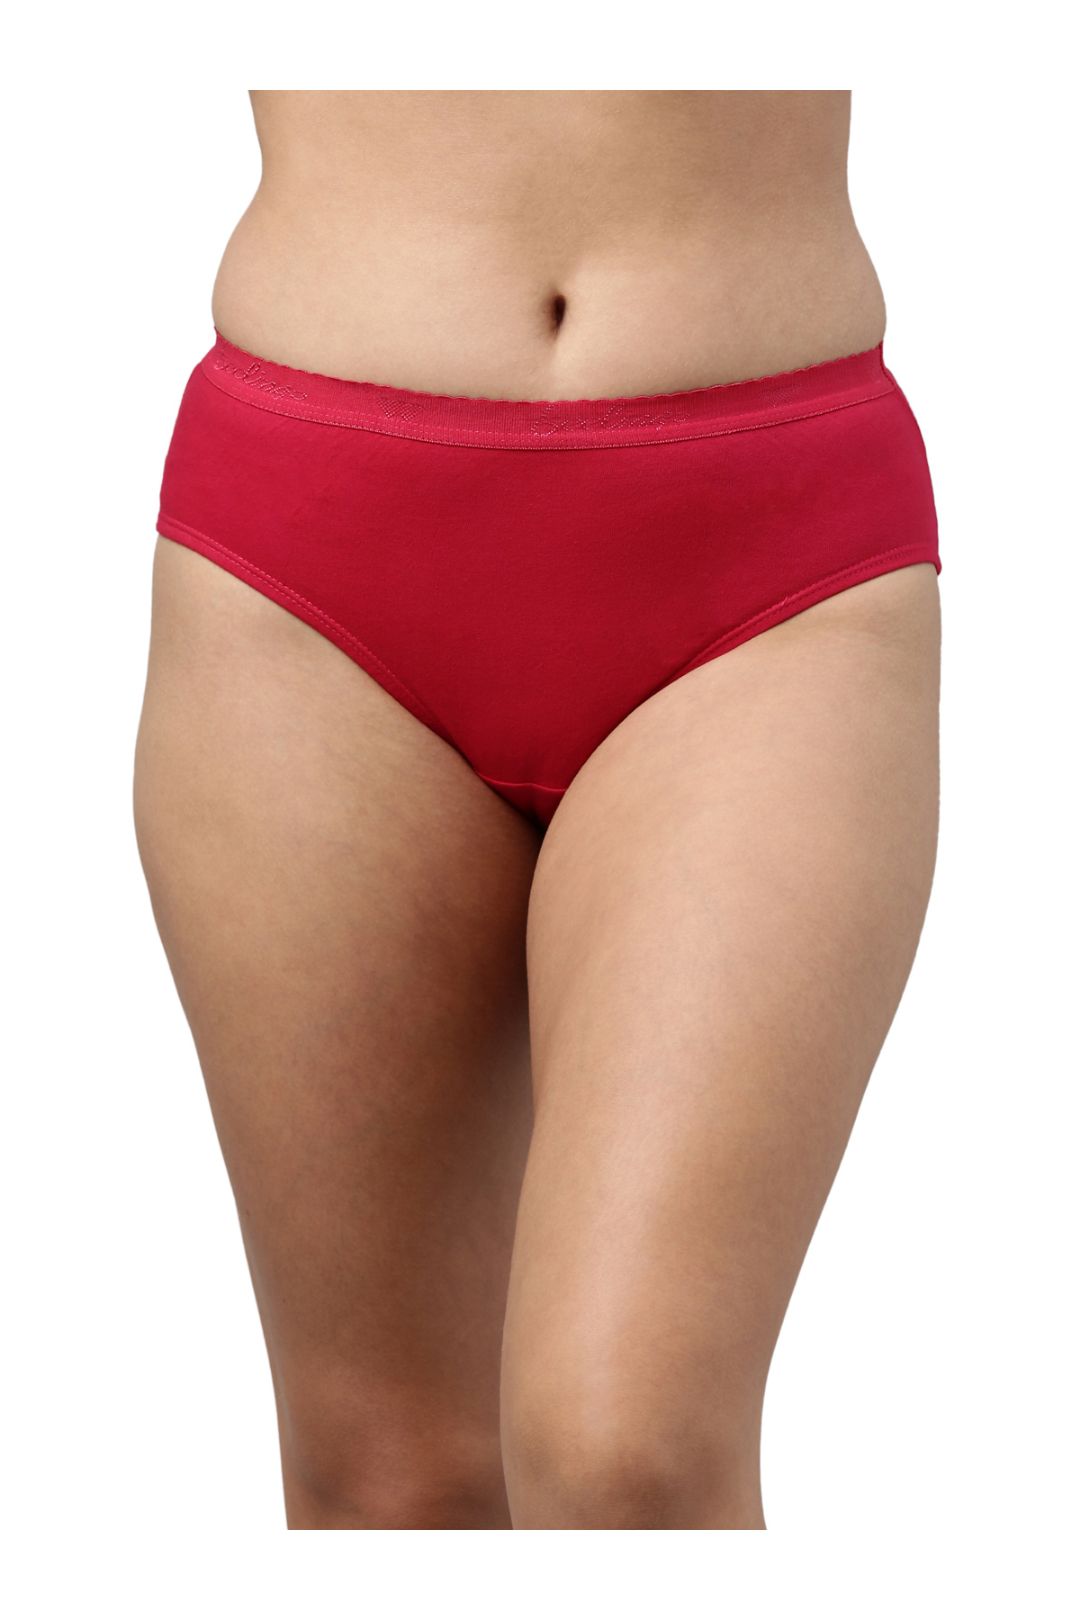 Buy Low Waist Bikini Panty in Red with Inner Elastic - Cotton